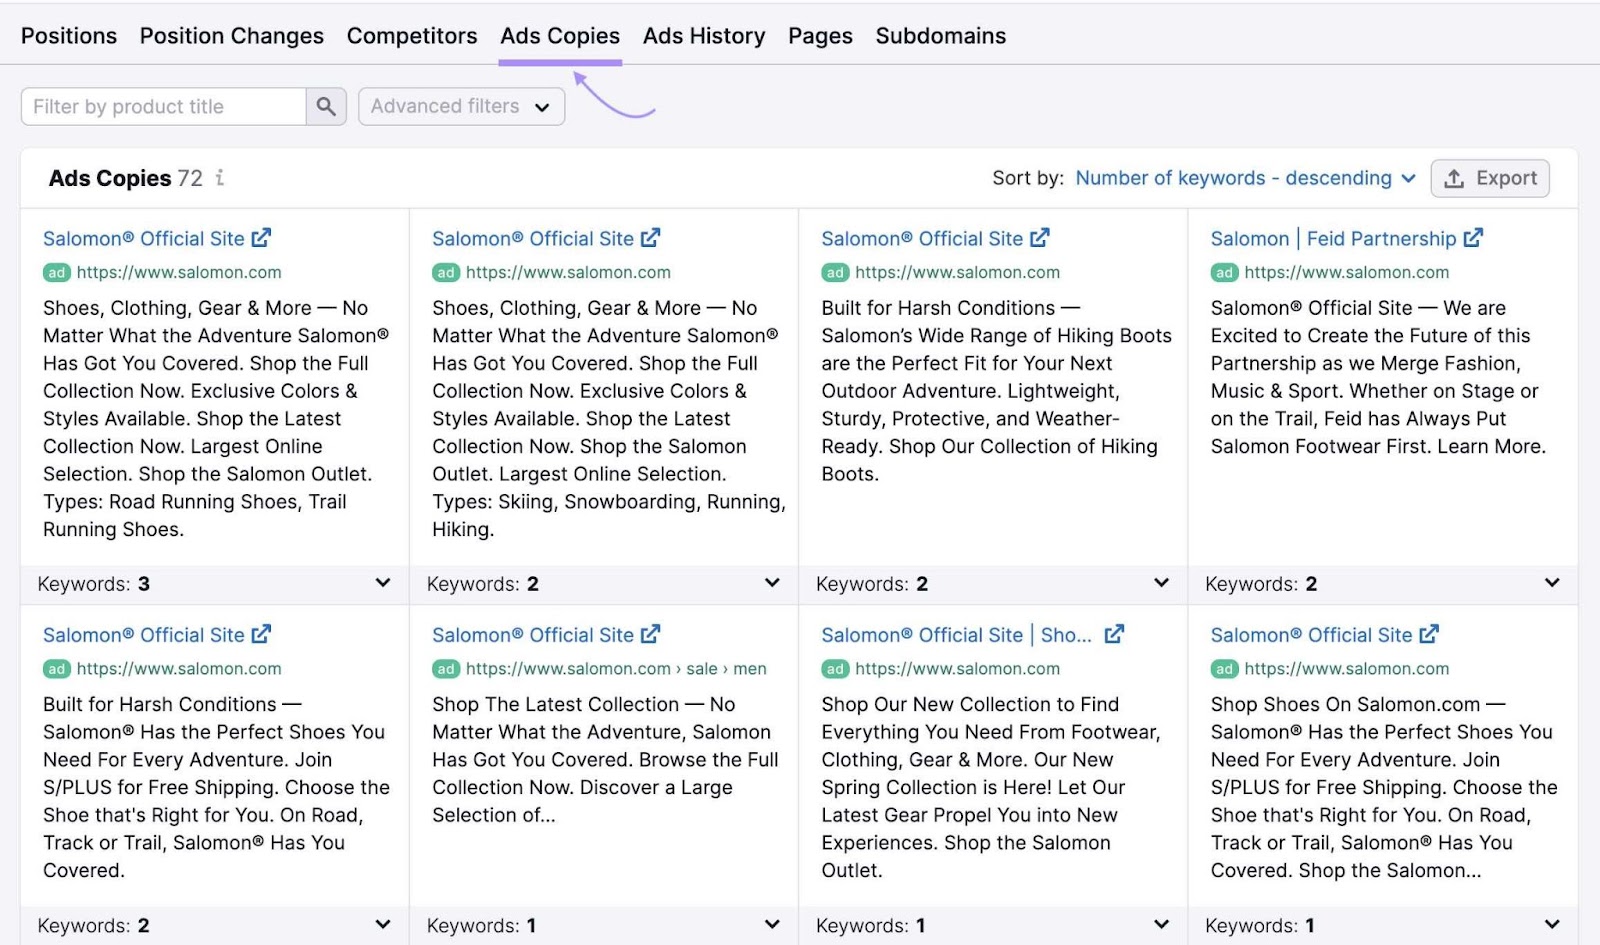 Ads copies shown for competitors' ads in Advertising Research tool